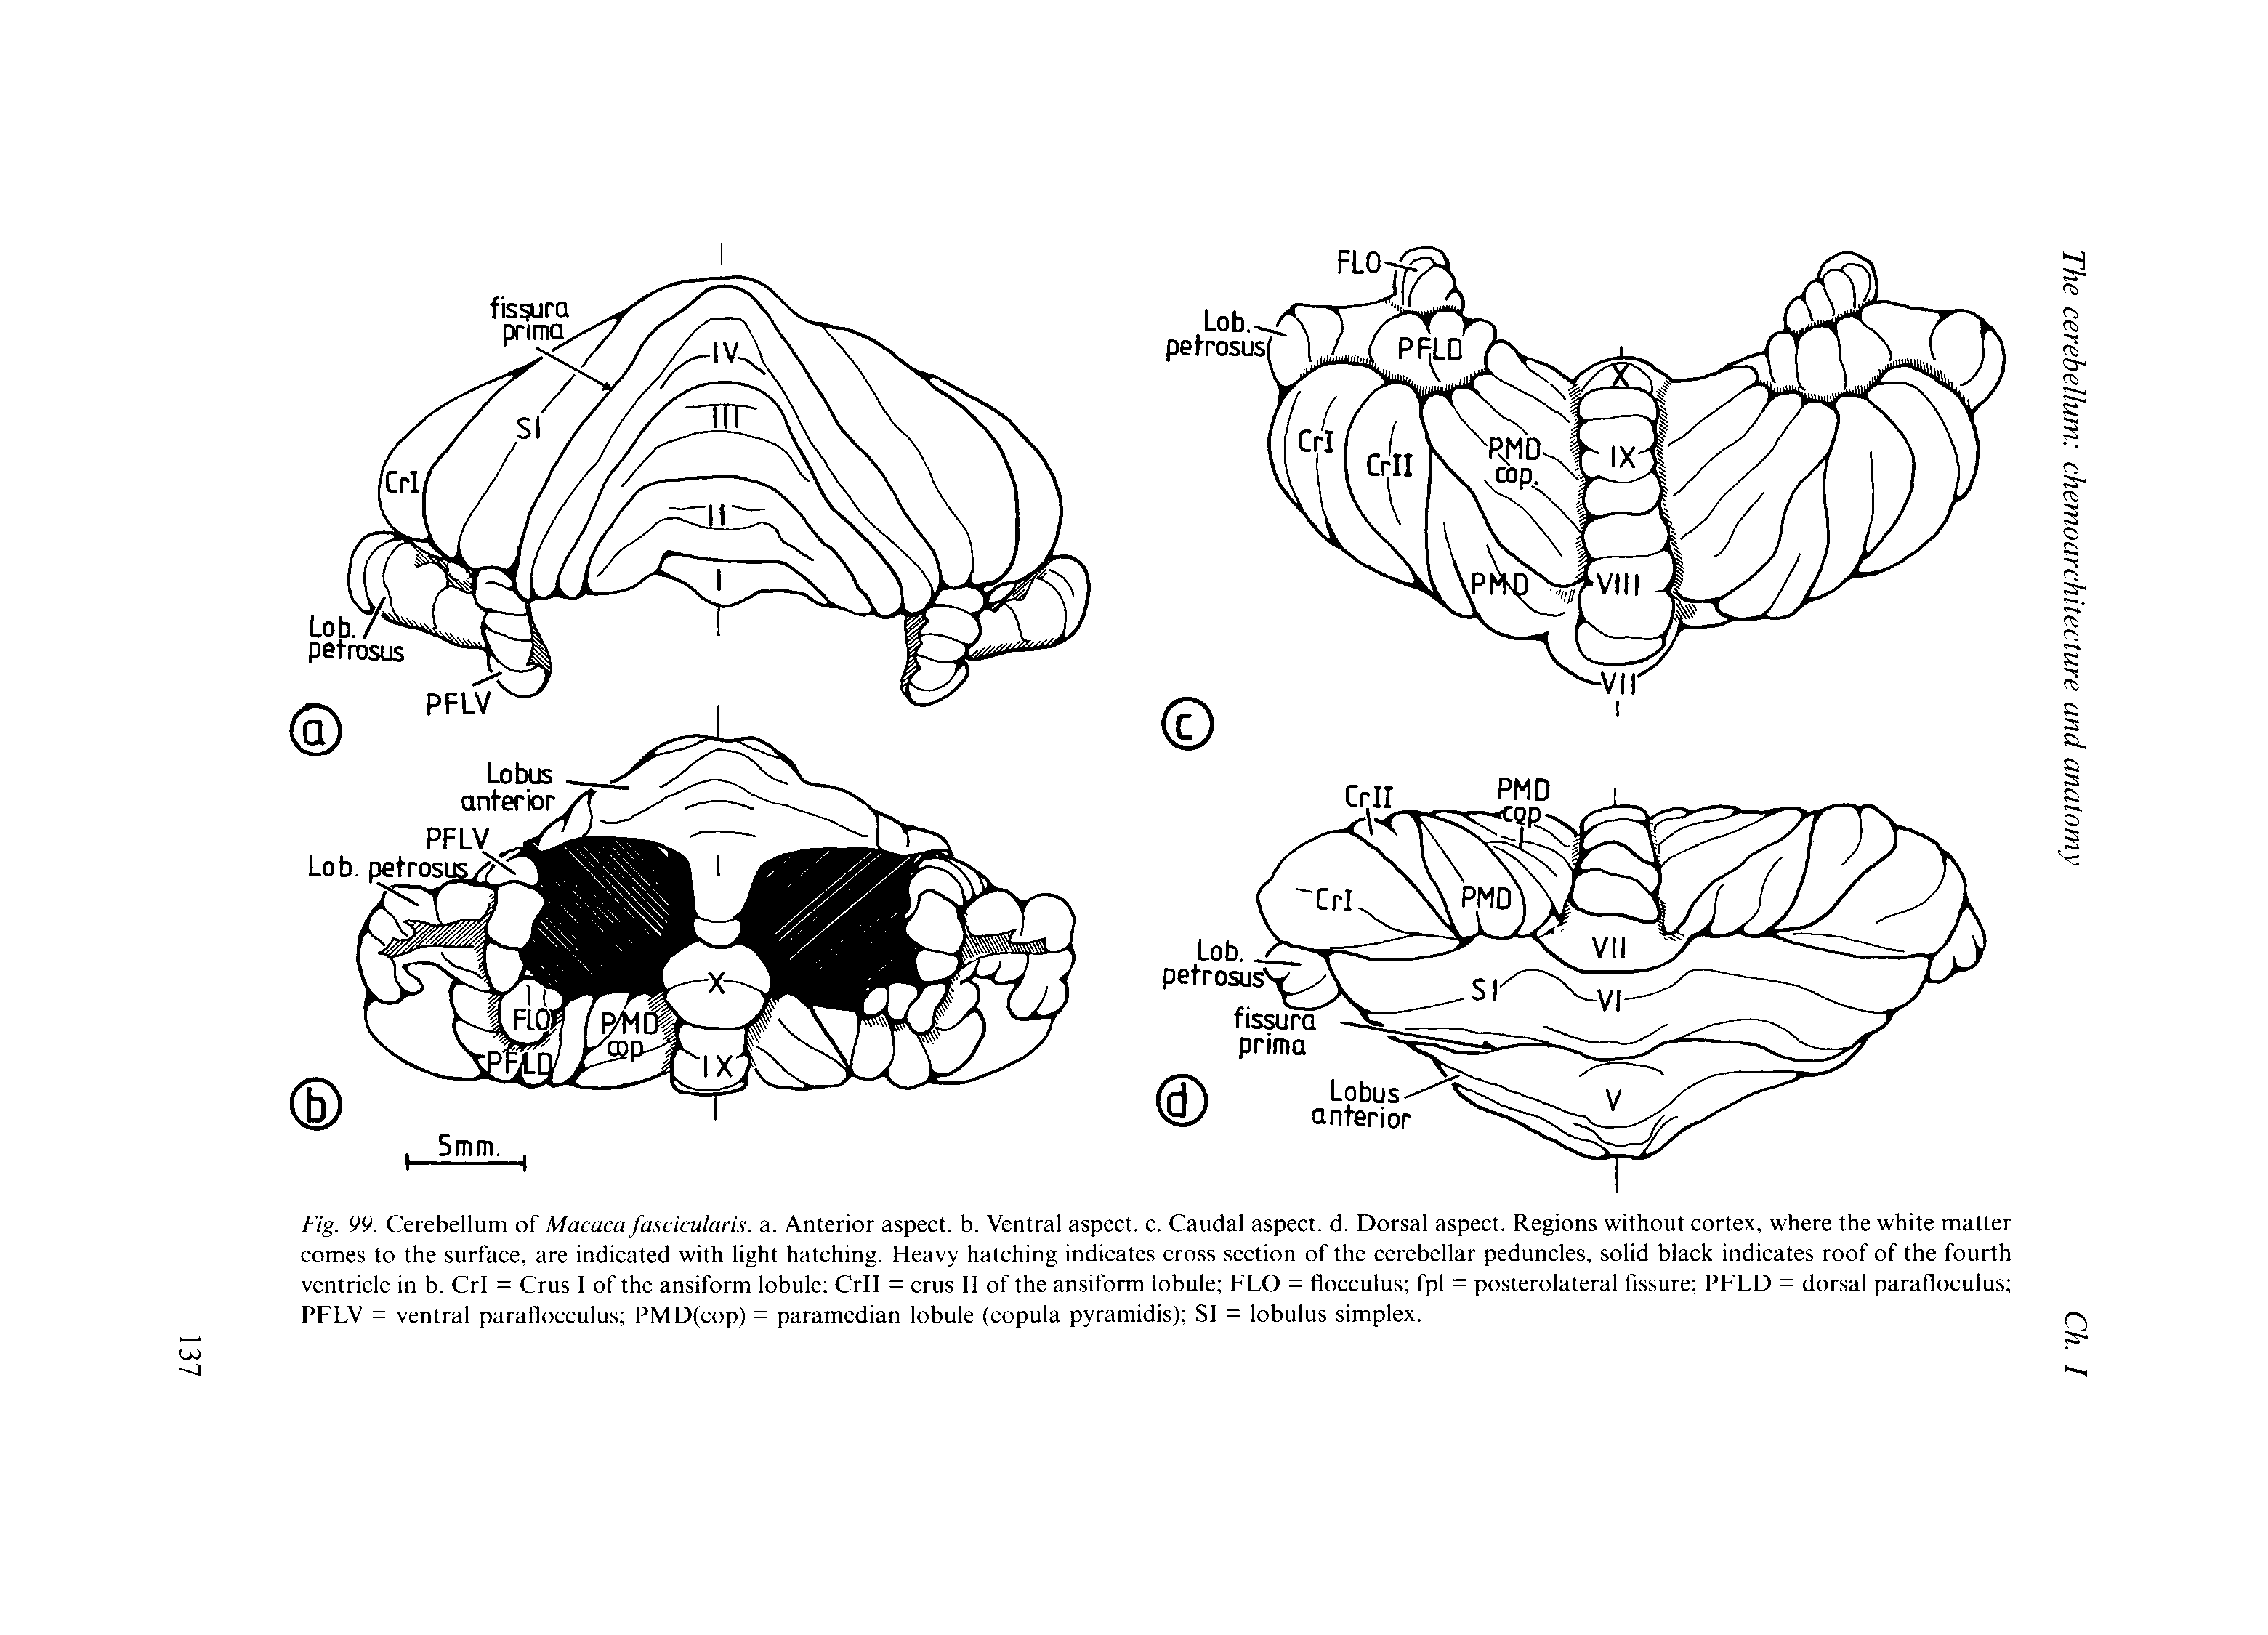 Fig. 99. Cerebellum of Macaca fascicularis. a. Anterior aspect, b. Ventral aspect, c. Caudal aspect, d. Dorsal aspect. Regions without cortex, where the white matter comes to the surface, are indicated with light hatching. Heavy hatching indicates cross section of the cerebellar peduncles, solid black indicates roof of the fourth ventricle in b. CrI = Crus I of the ansiform lobule CrII = crus II of the ansiform lobule FLO = flocculus fpl = posterolateral fissure PFLD = dorsal parafloculus PFLV = ventral paraflocculus PMD(cop) = paramedian lobule (copula pyramidis) SI = lobulus simplex.